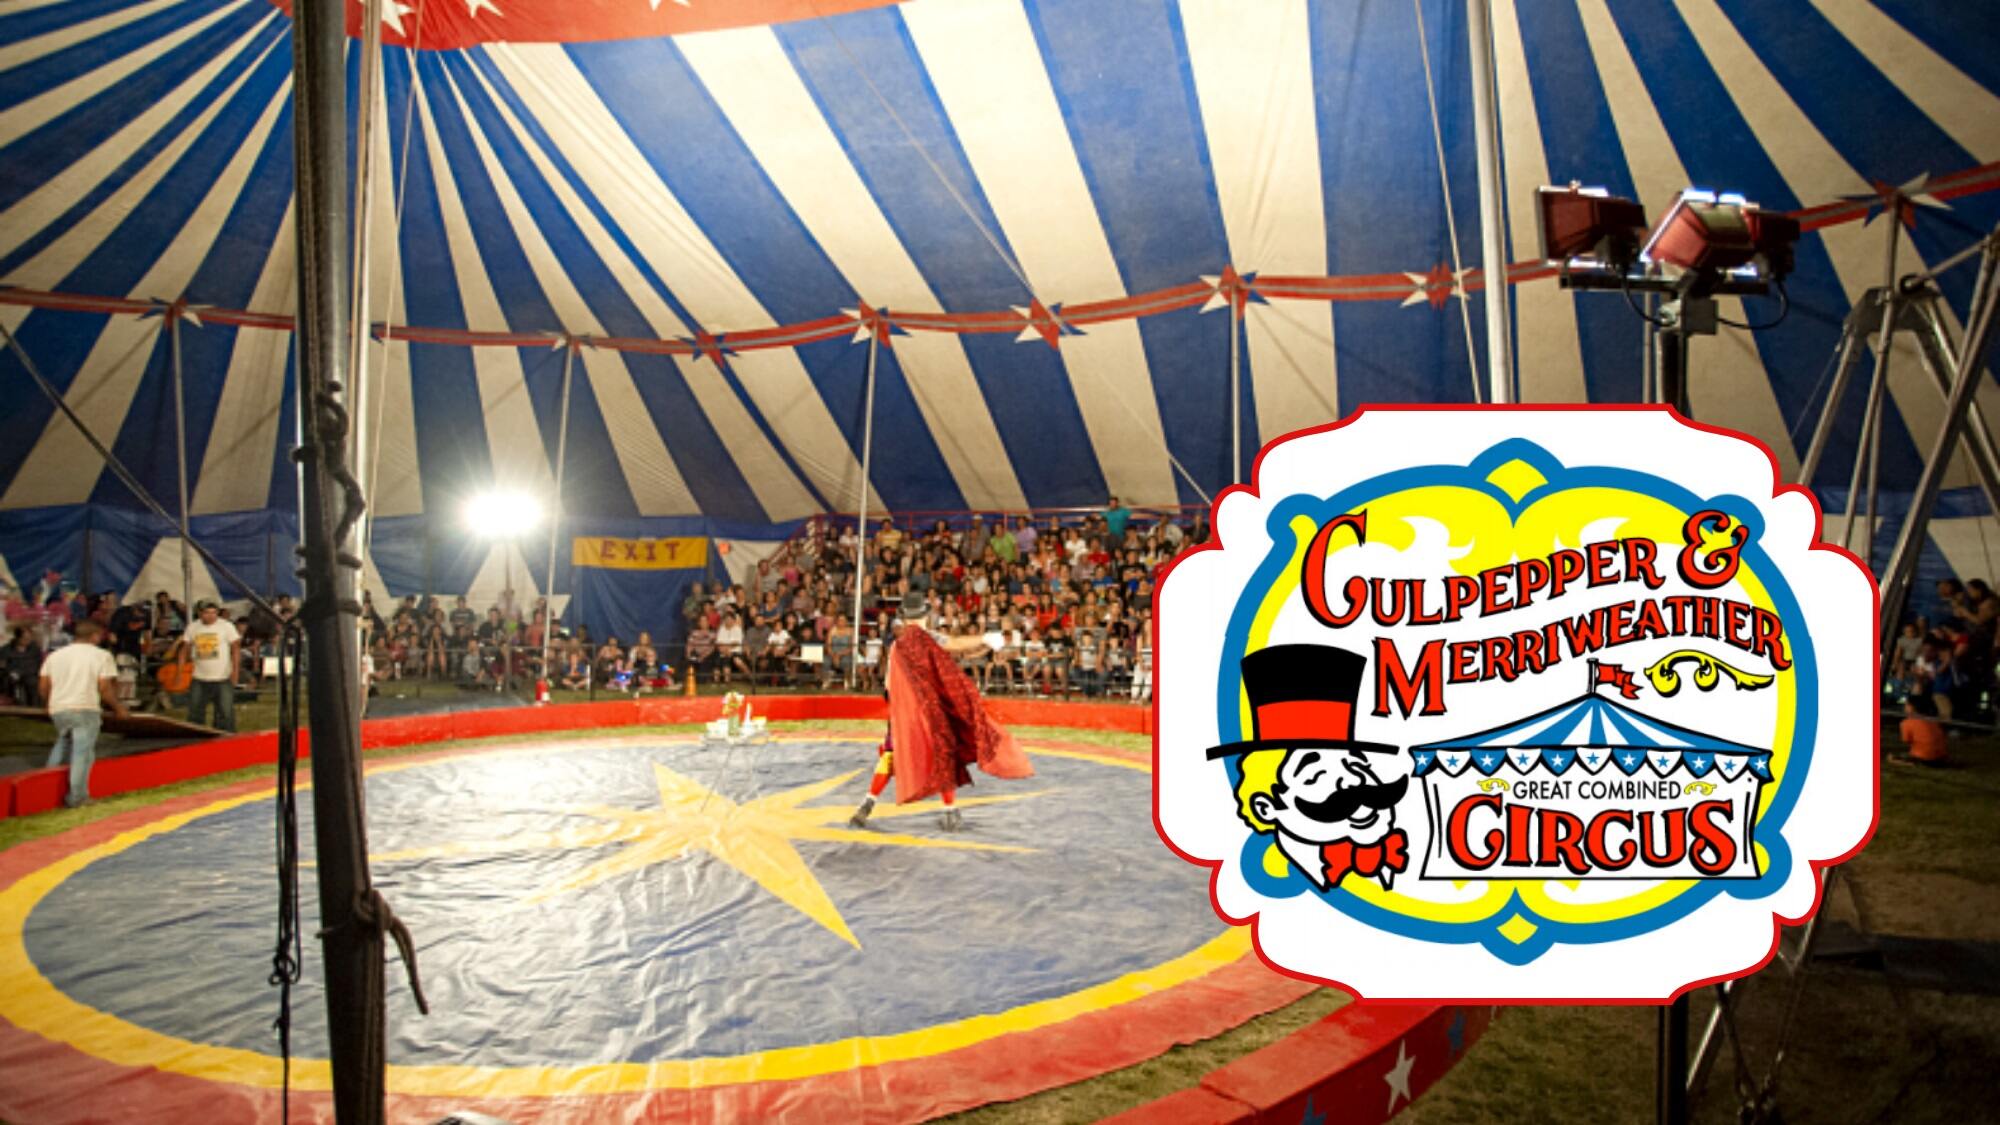 10-facts-you-must-know-about-culpepper-merriweather-circus